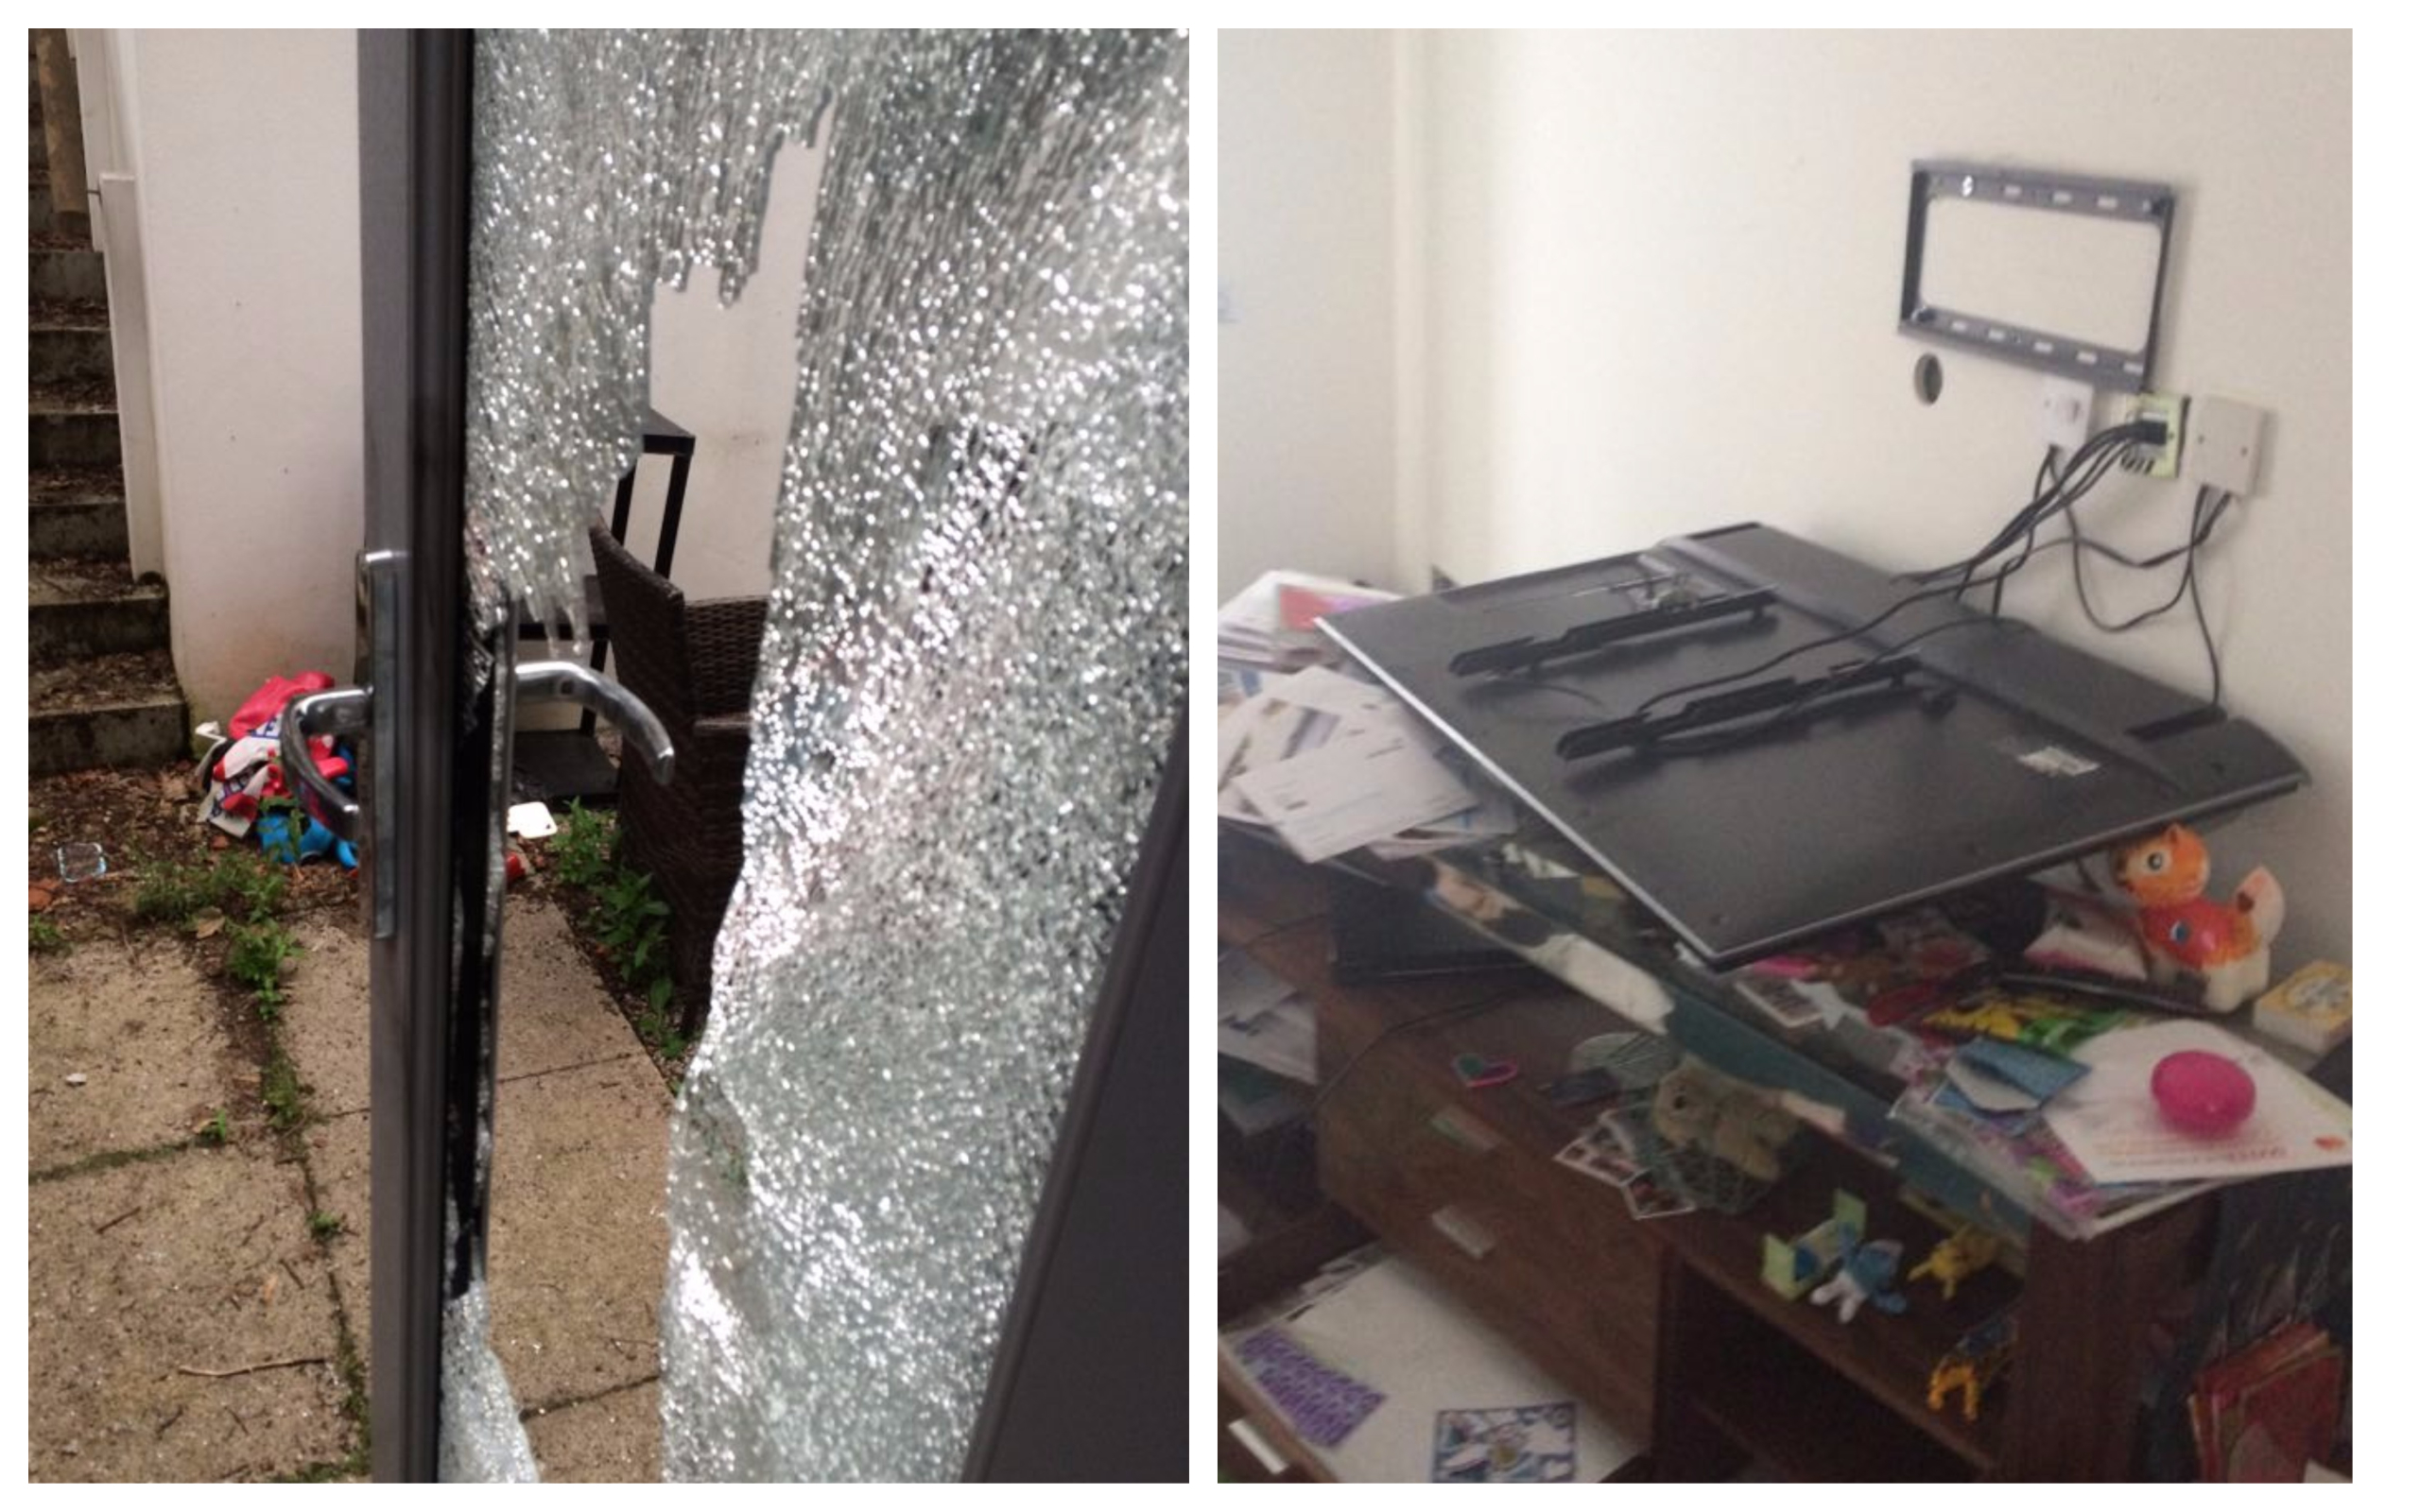 The thieves stole computers, tablets, and other electronics - but left the television after ripping it from the wall